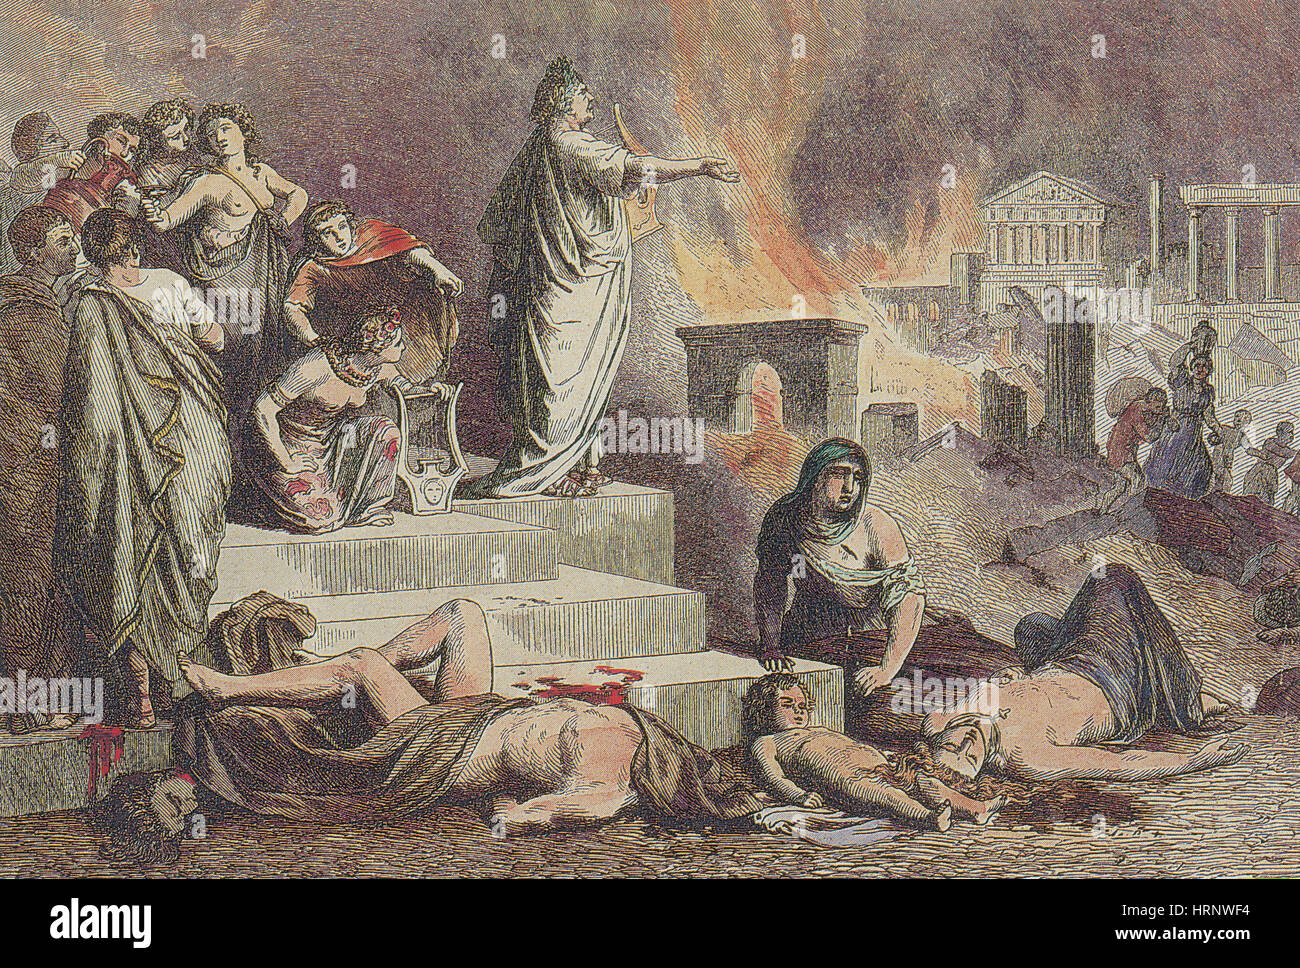 Nero and the Great Fire of Rome, 64 AD Stock Photo